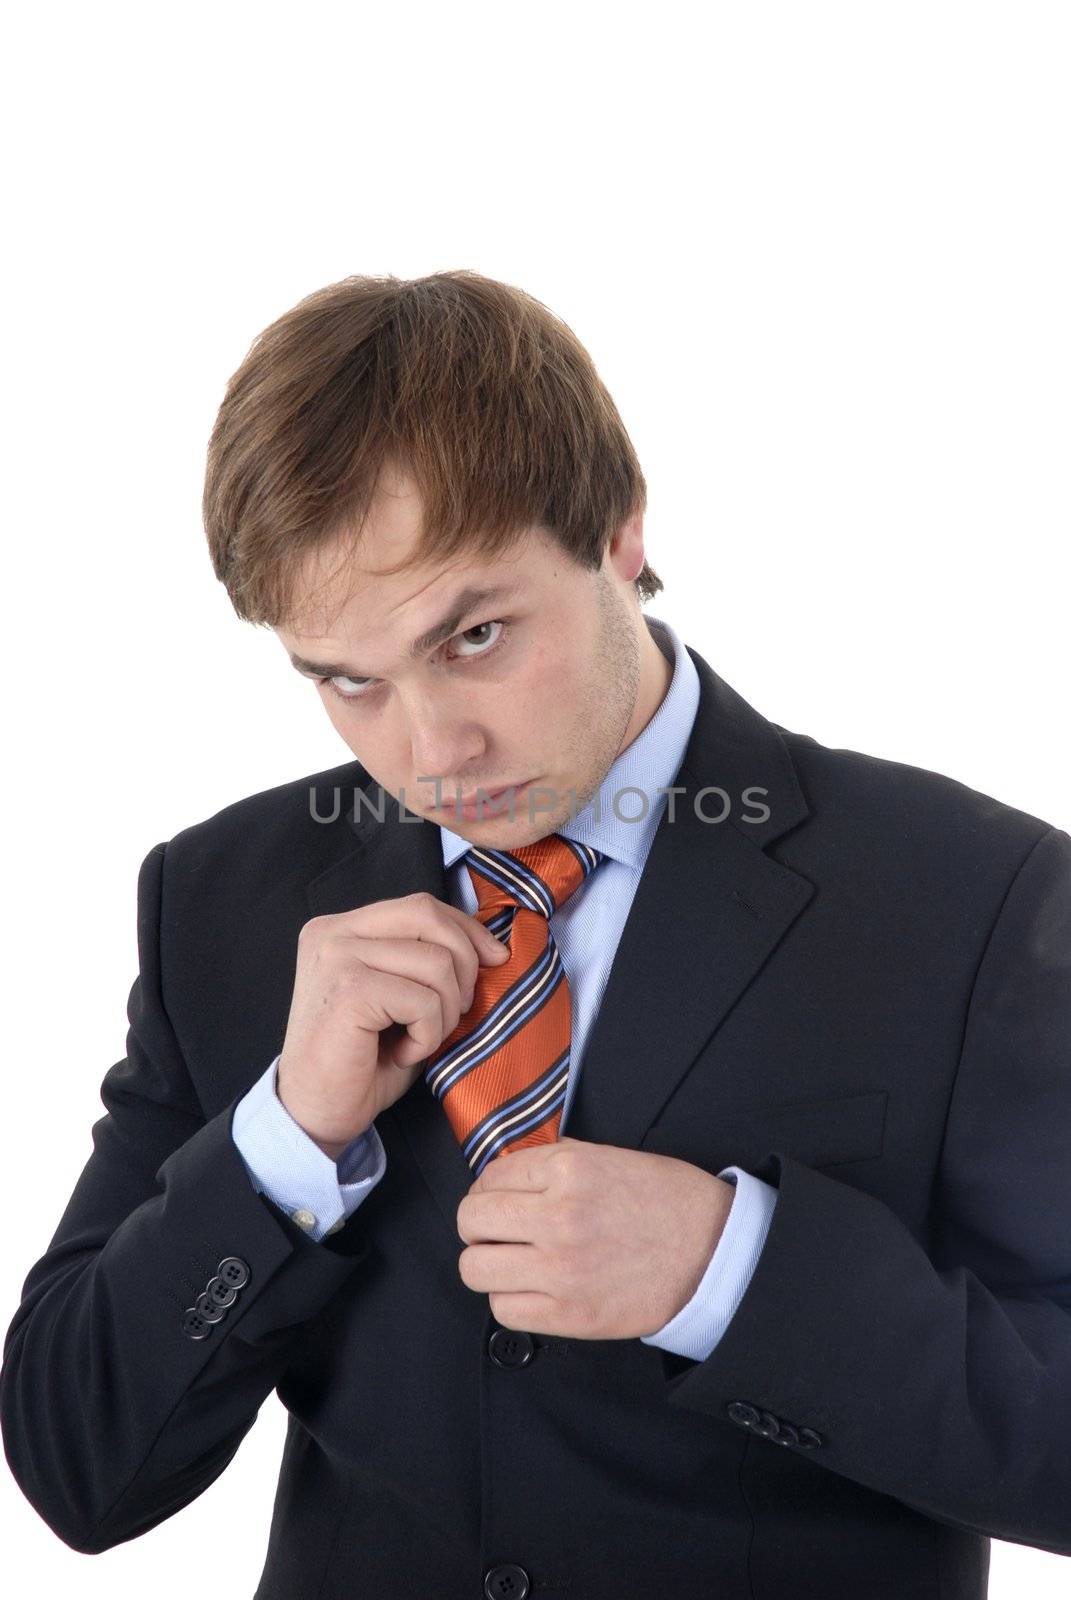 young business man with tie in white background